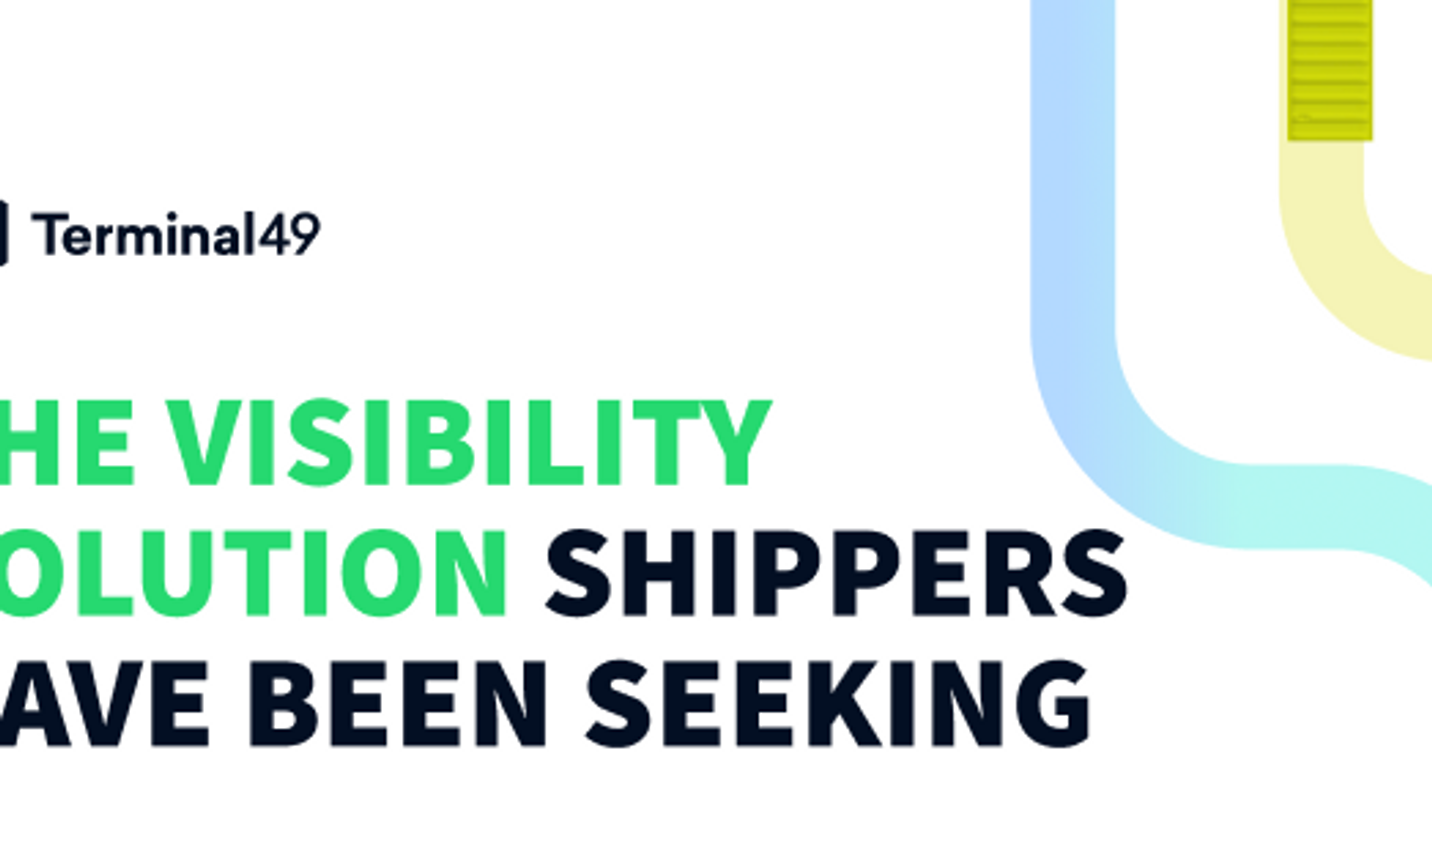 From Frustration to Efficiency: Why Terminal49 is the visibility solution shippers have been seeking